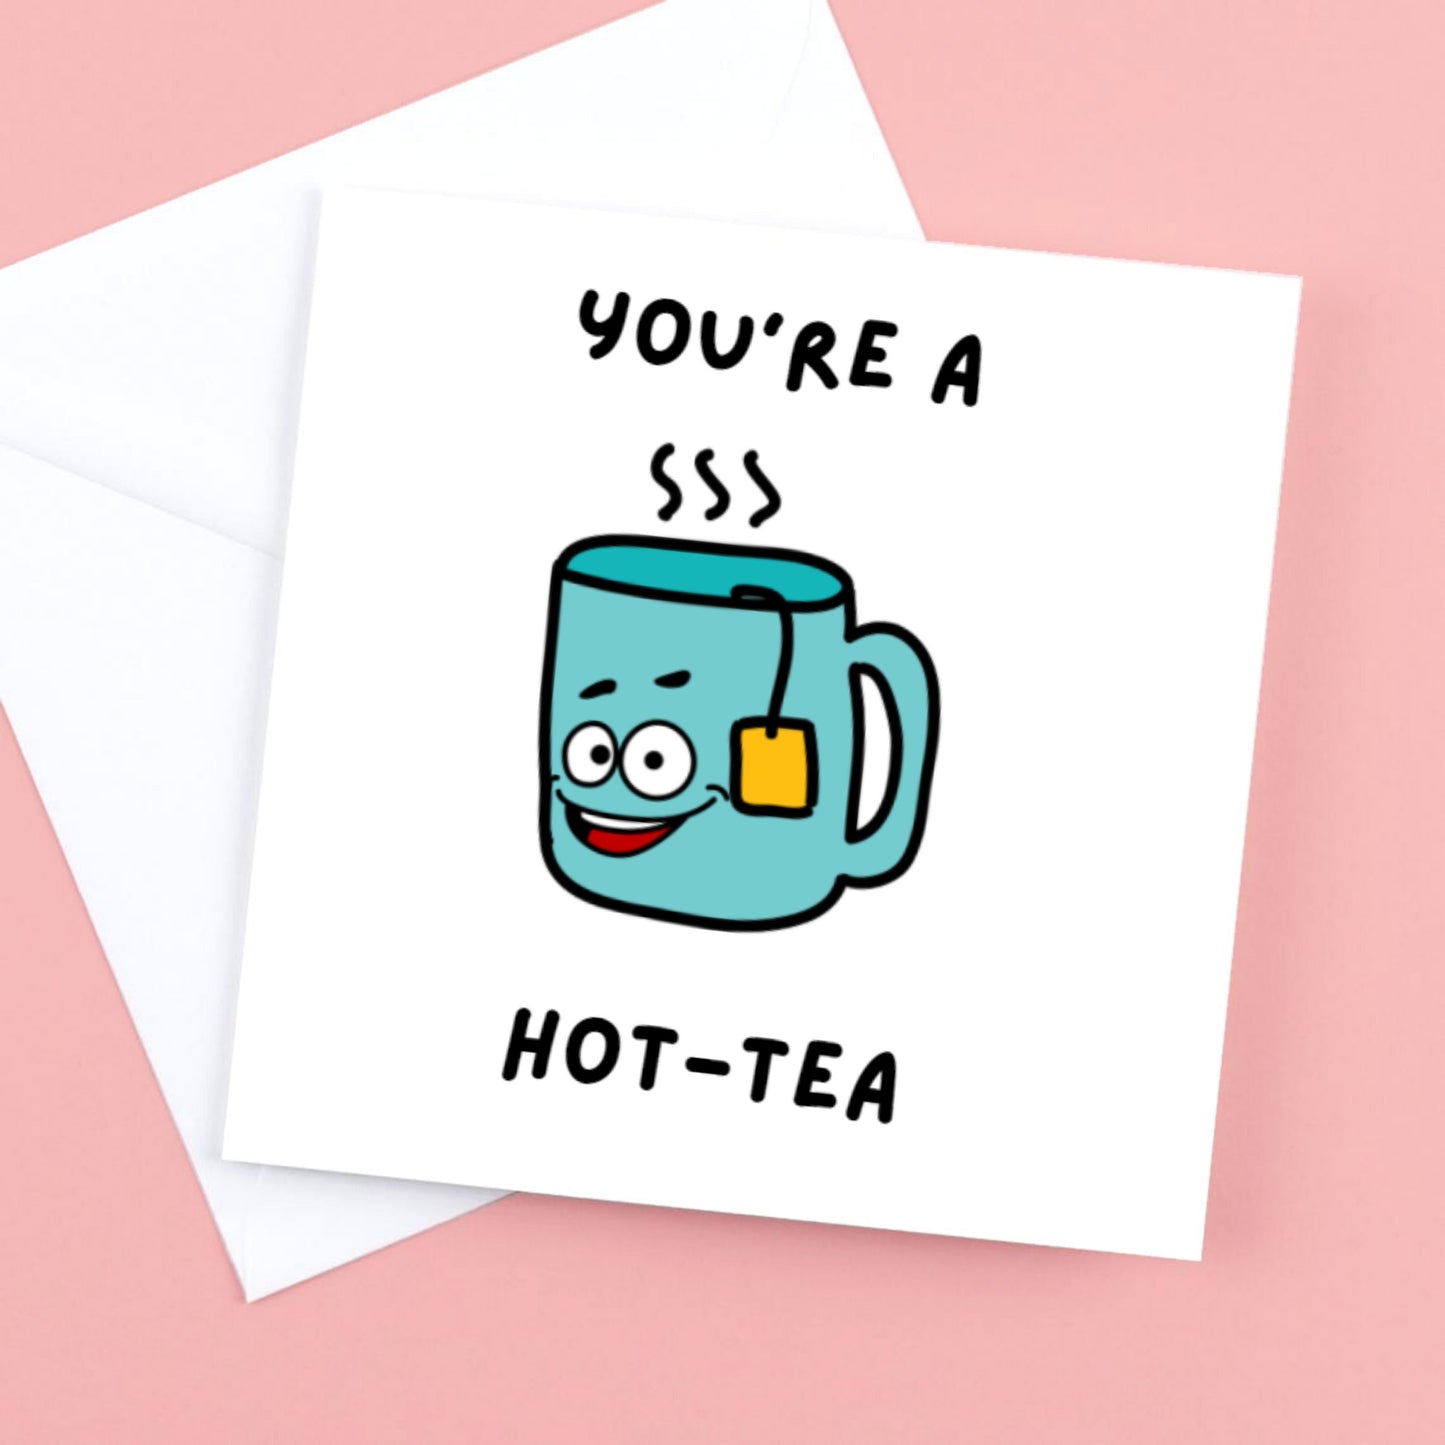 Valentines Card "You're a Hot Tea" with a tea bag enclosed for the "hot tea" in the house!